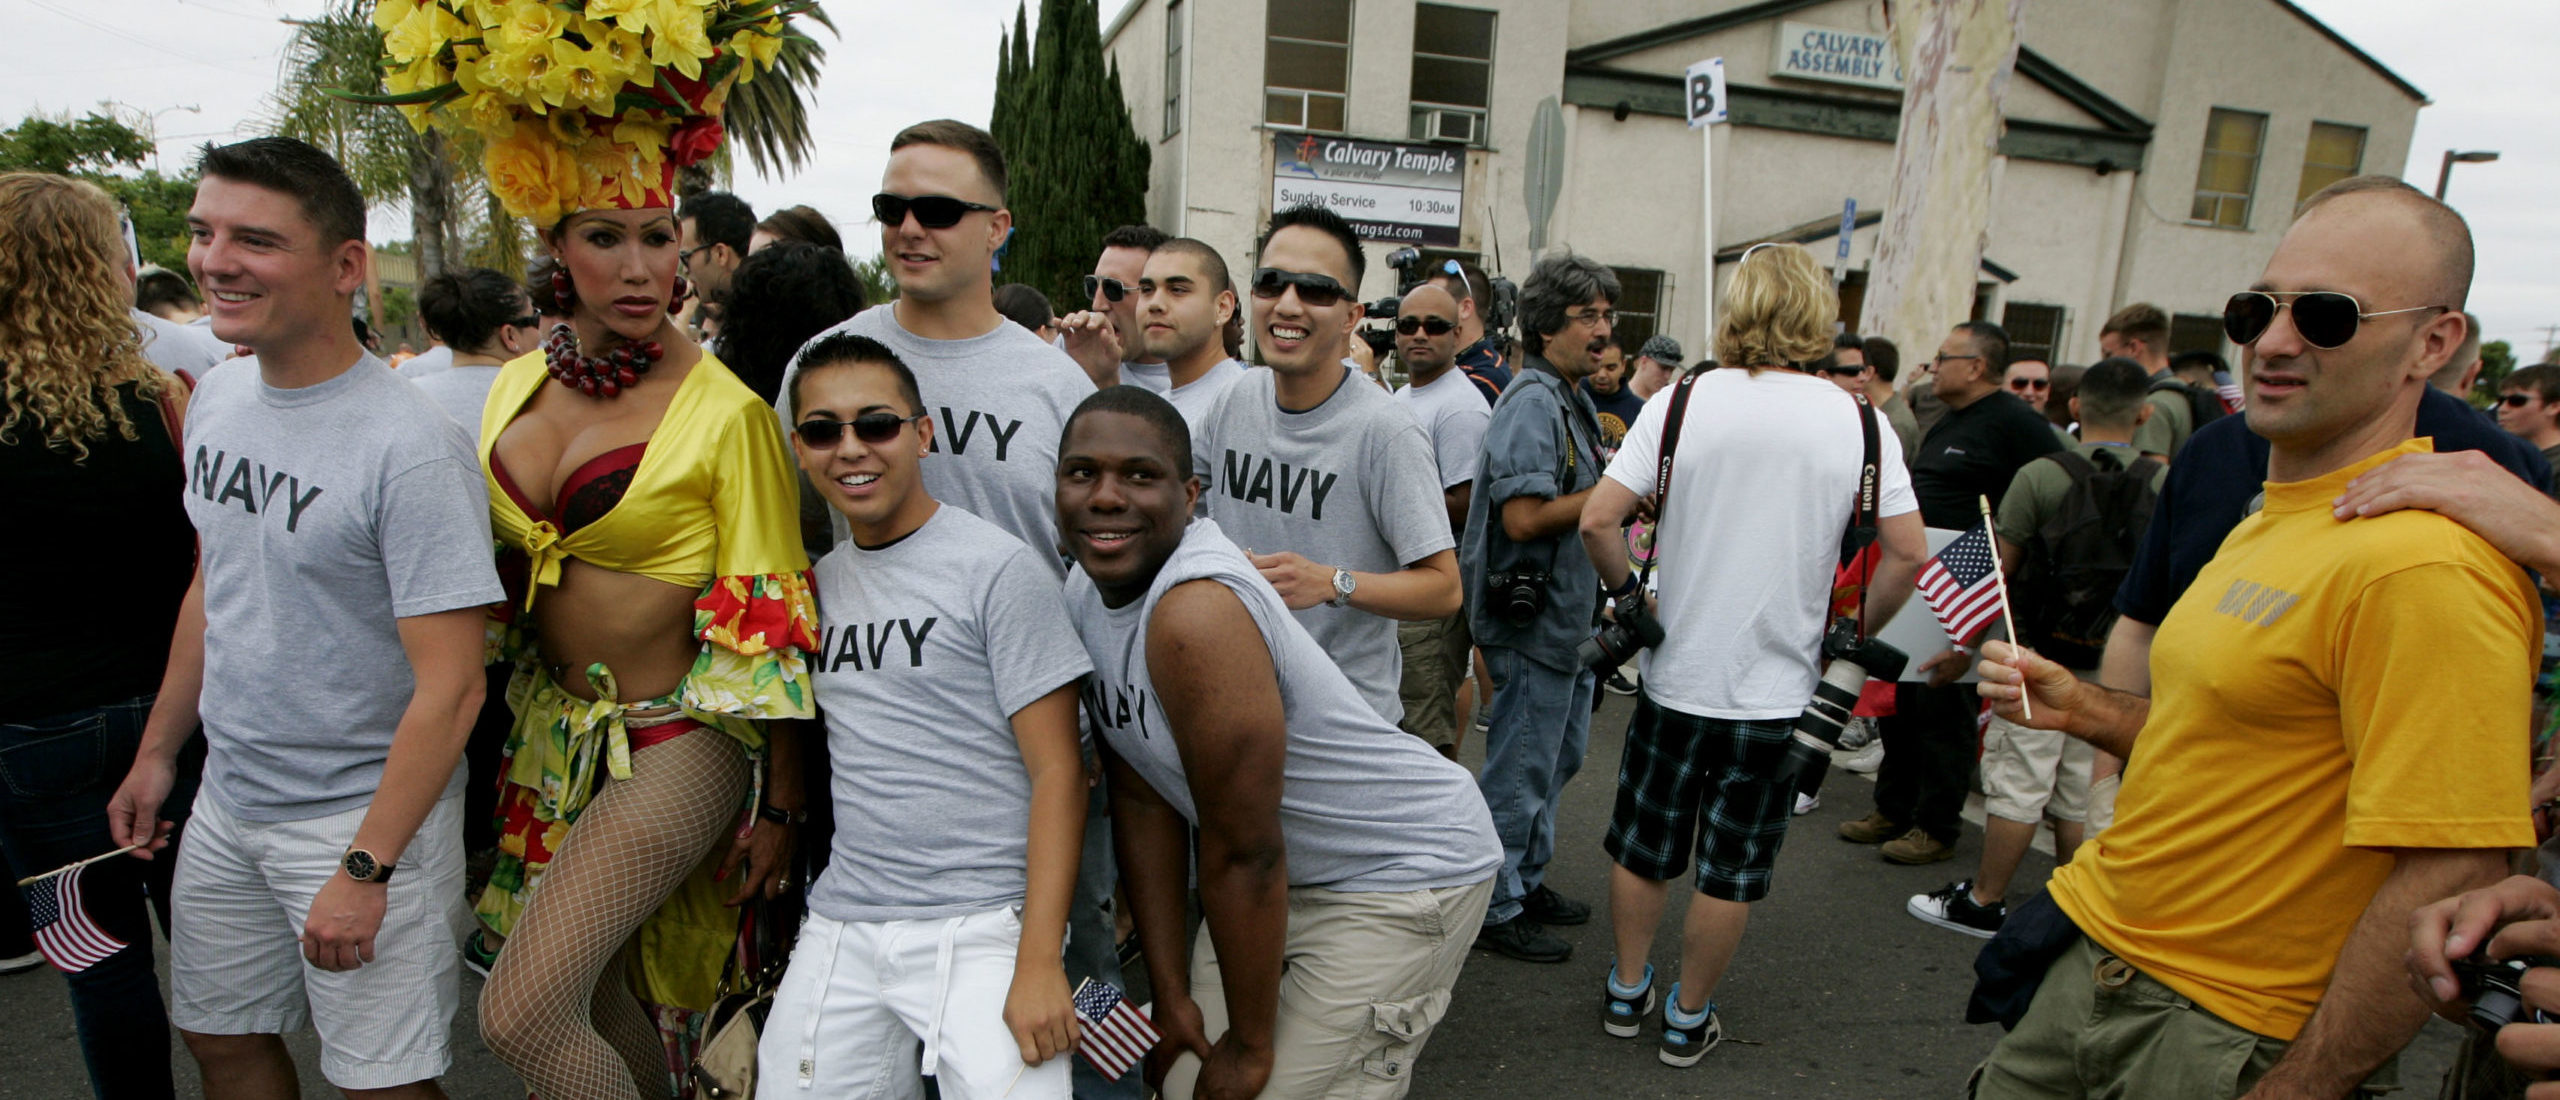 SAN DIEGO, CA - JULY 16: Navy personel pose for a picture with drag queen Bianca Sullivan before marching in the San Diego gay pride parade July 16, 2011 in San Diego, California. (Photo by Sandy Huffaker/Getty Images)